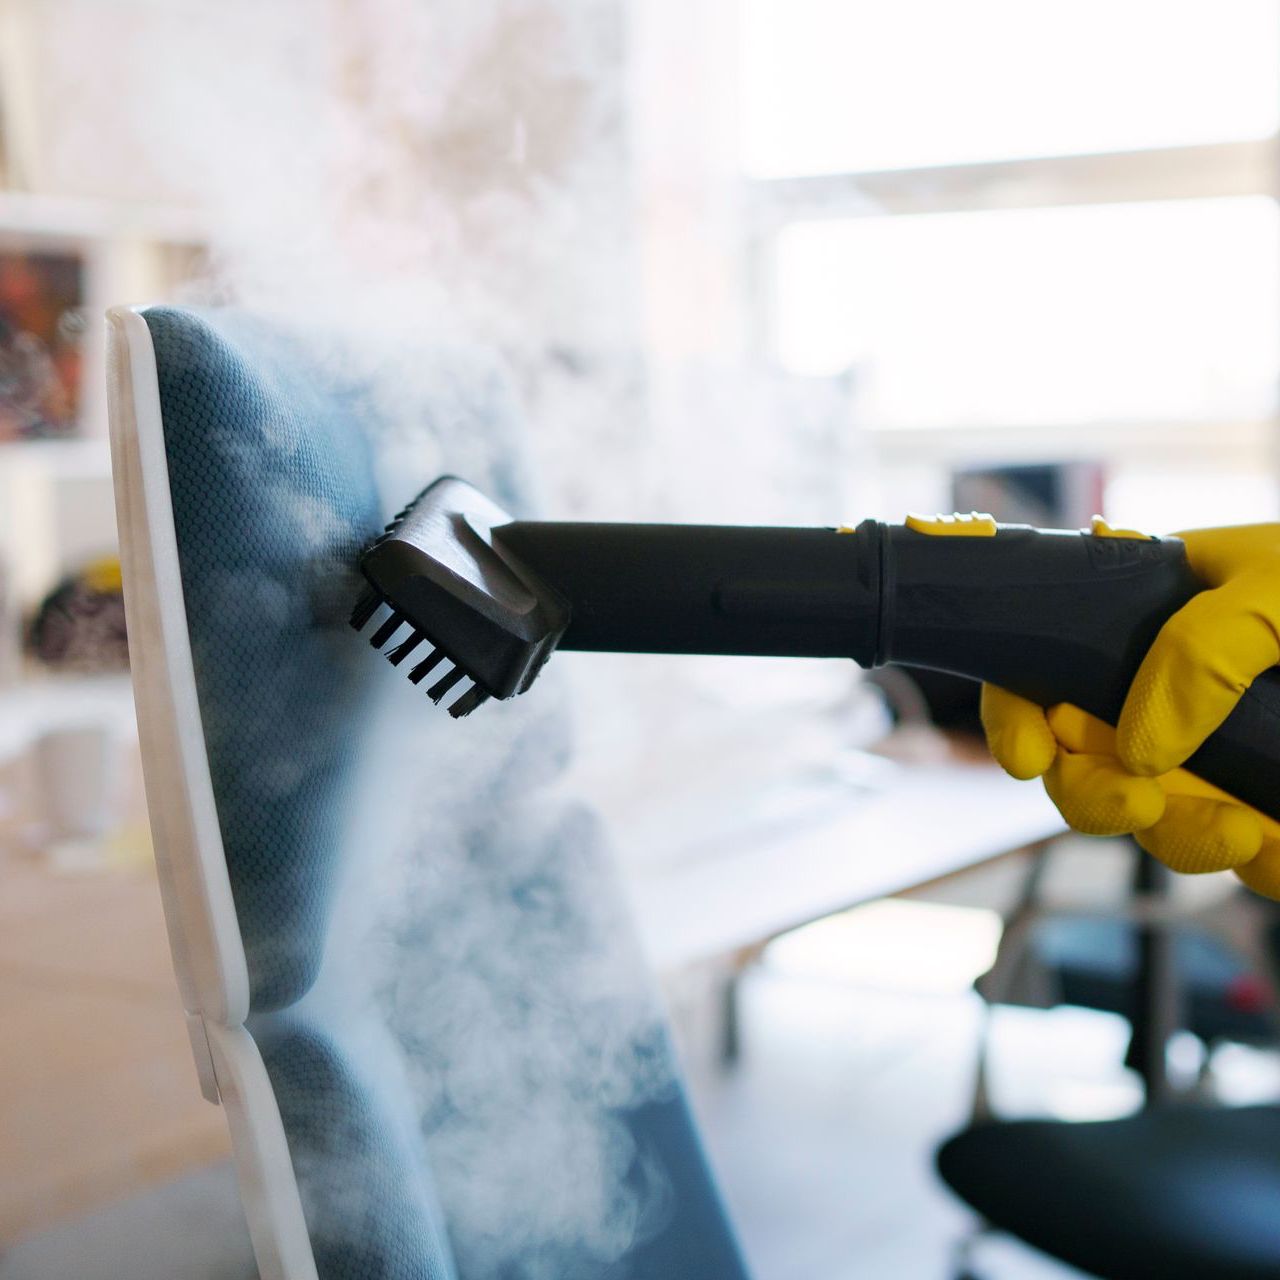 a person wearing yellow gloves is cleaning a chair with a steam cleaner